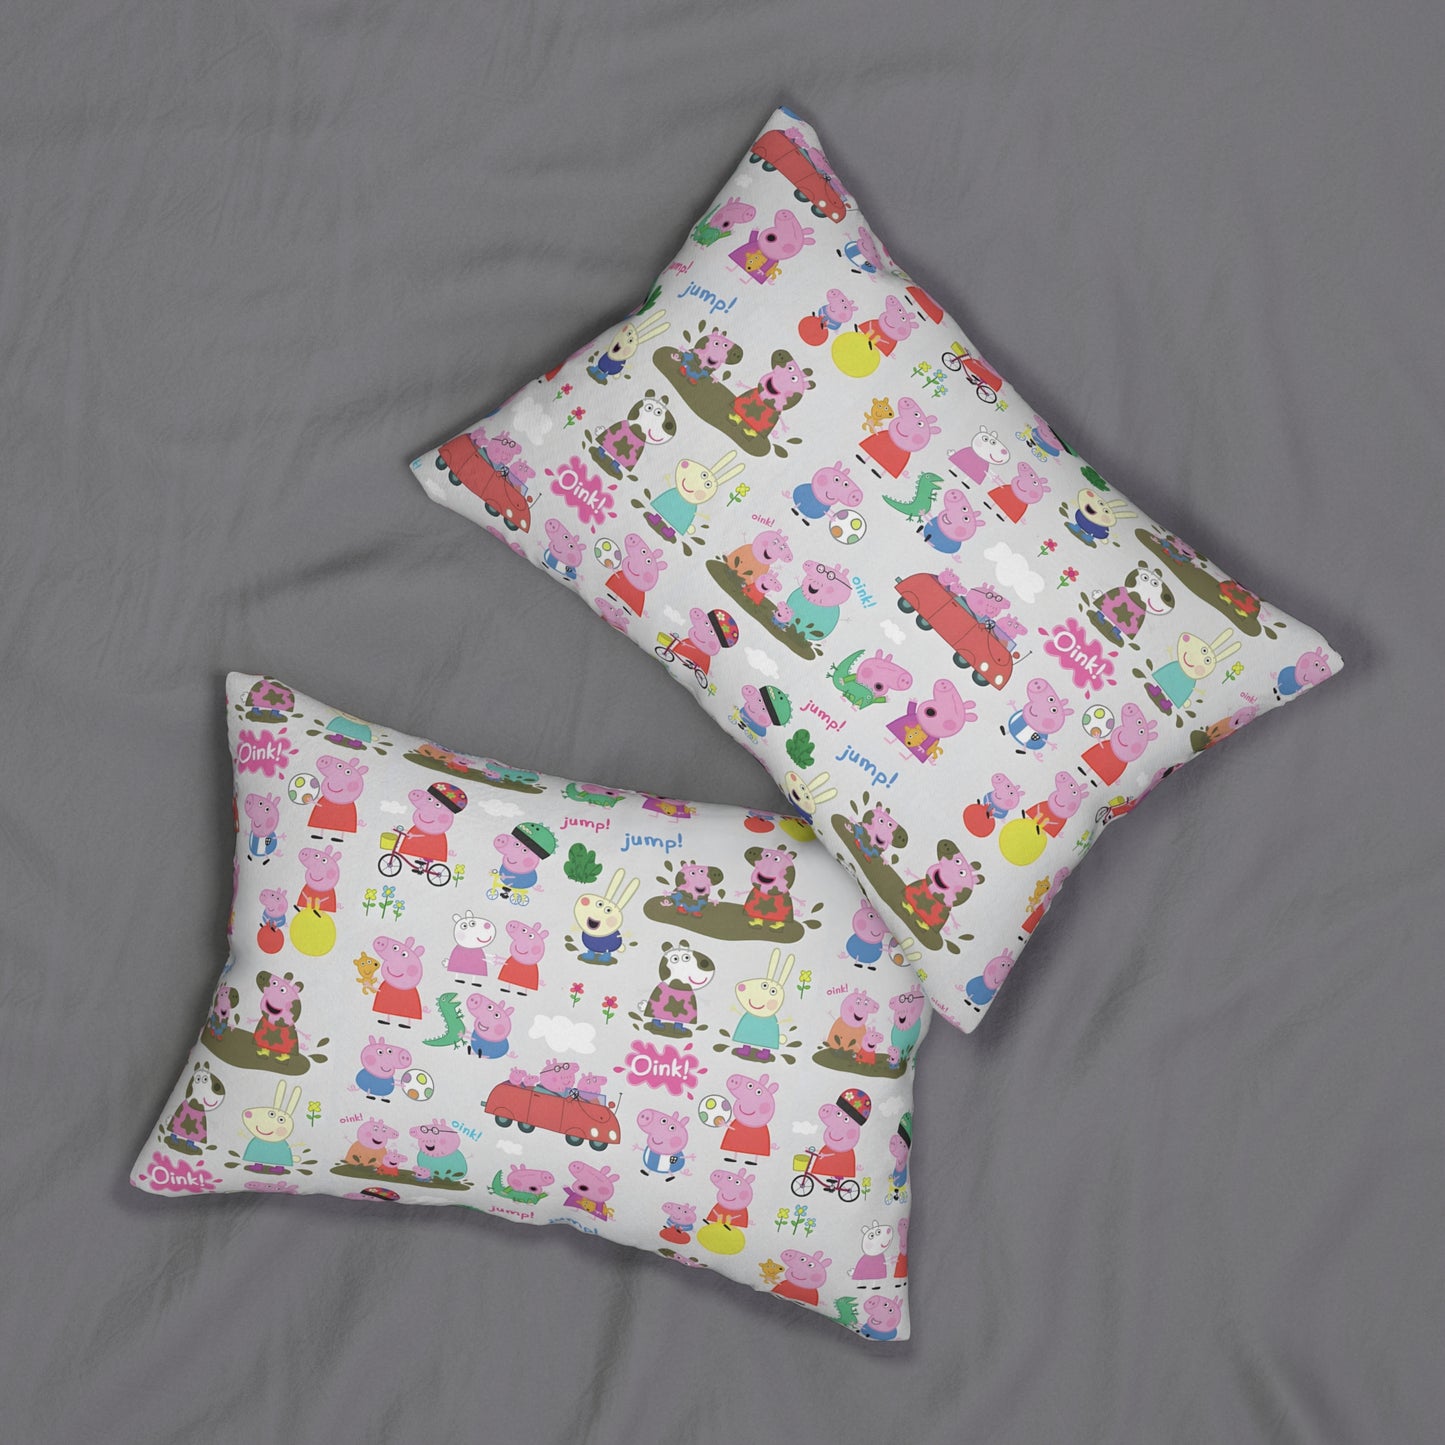 Peppa Pig Oink Oink Collage Spun Polyester Lumbar Pillow